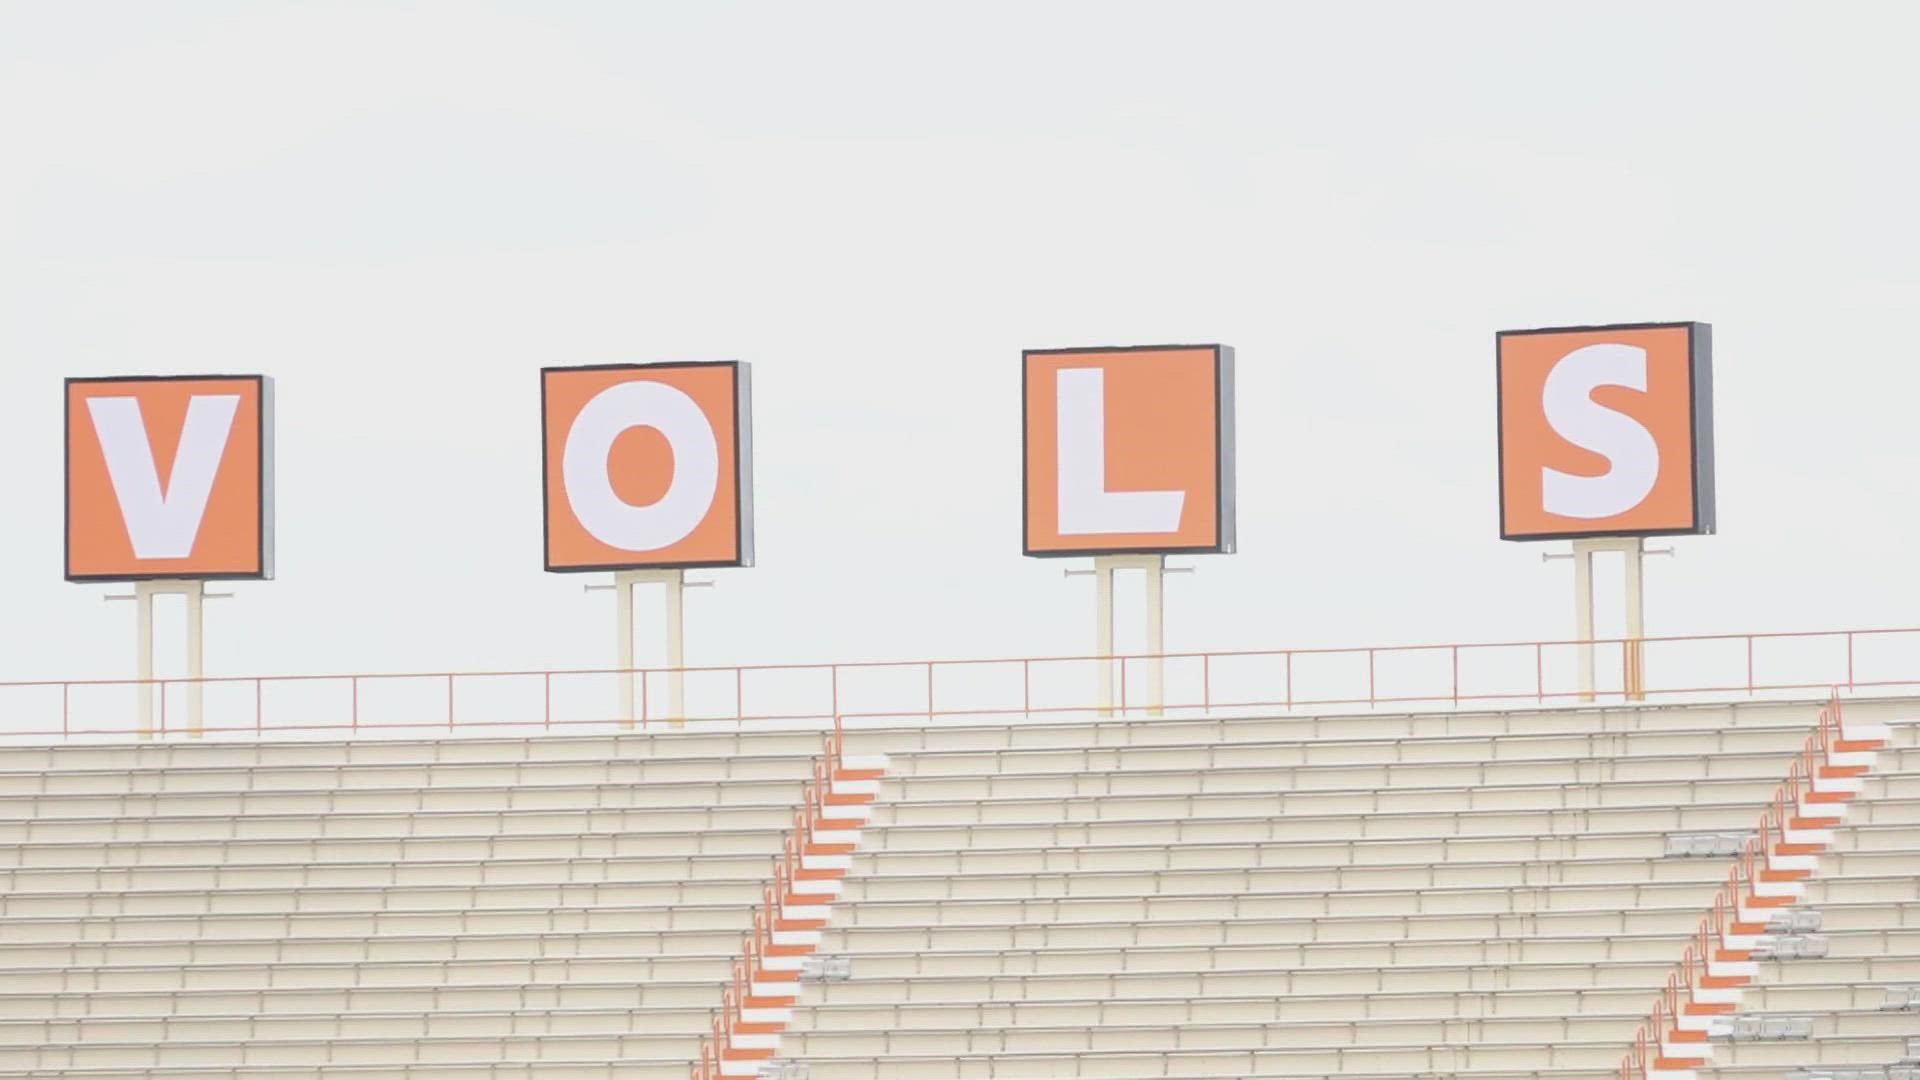 10News toured the stadium on Tuesday after the renovation was complete.